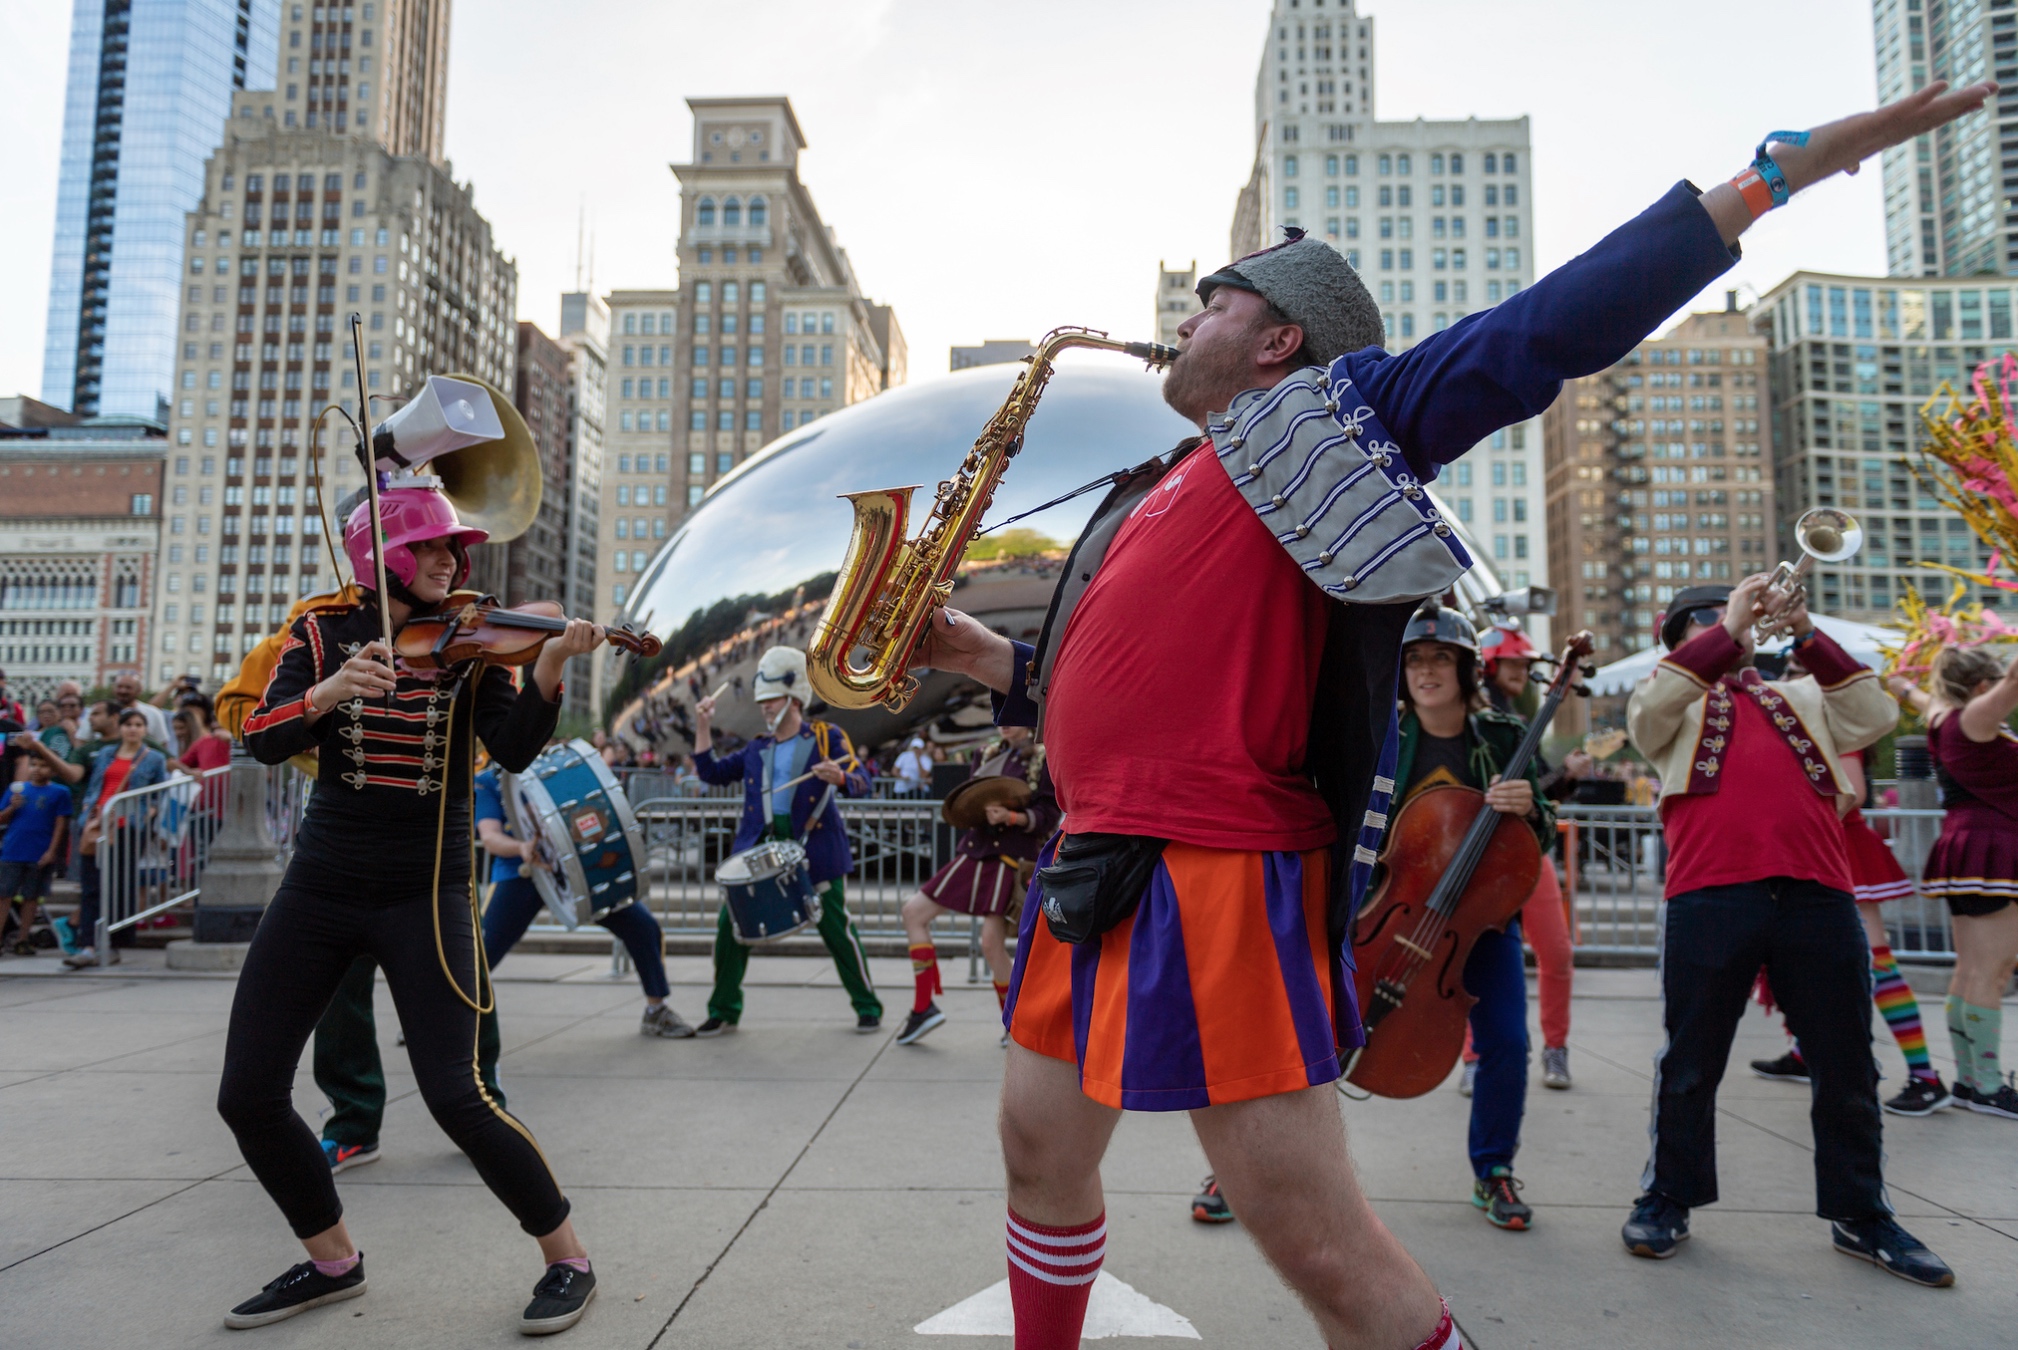 Chicago’s Summer Music Events and More Announced by Mayor Lightfoot and DCASE